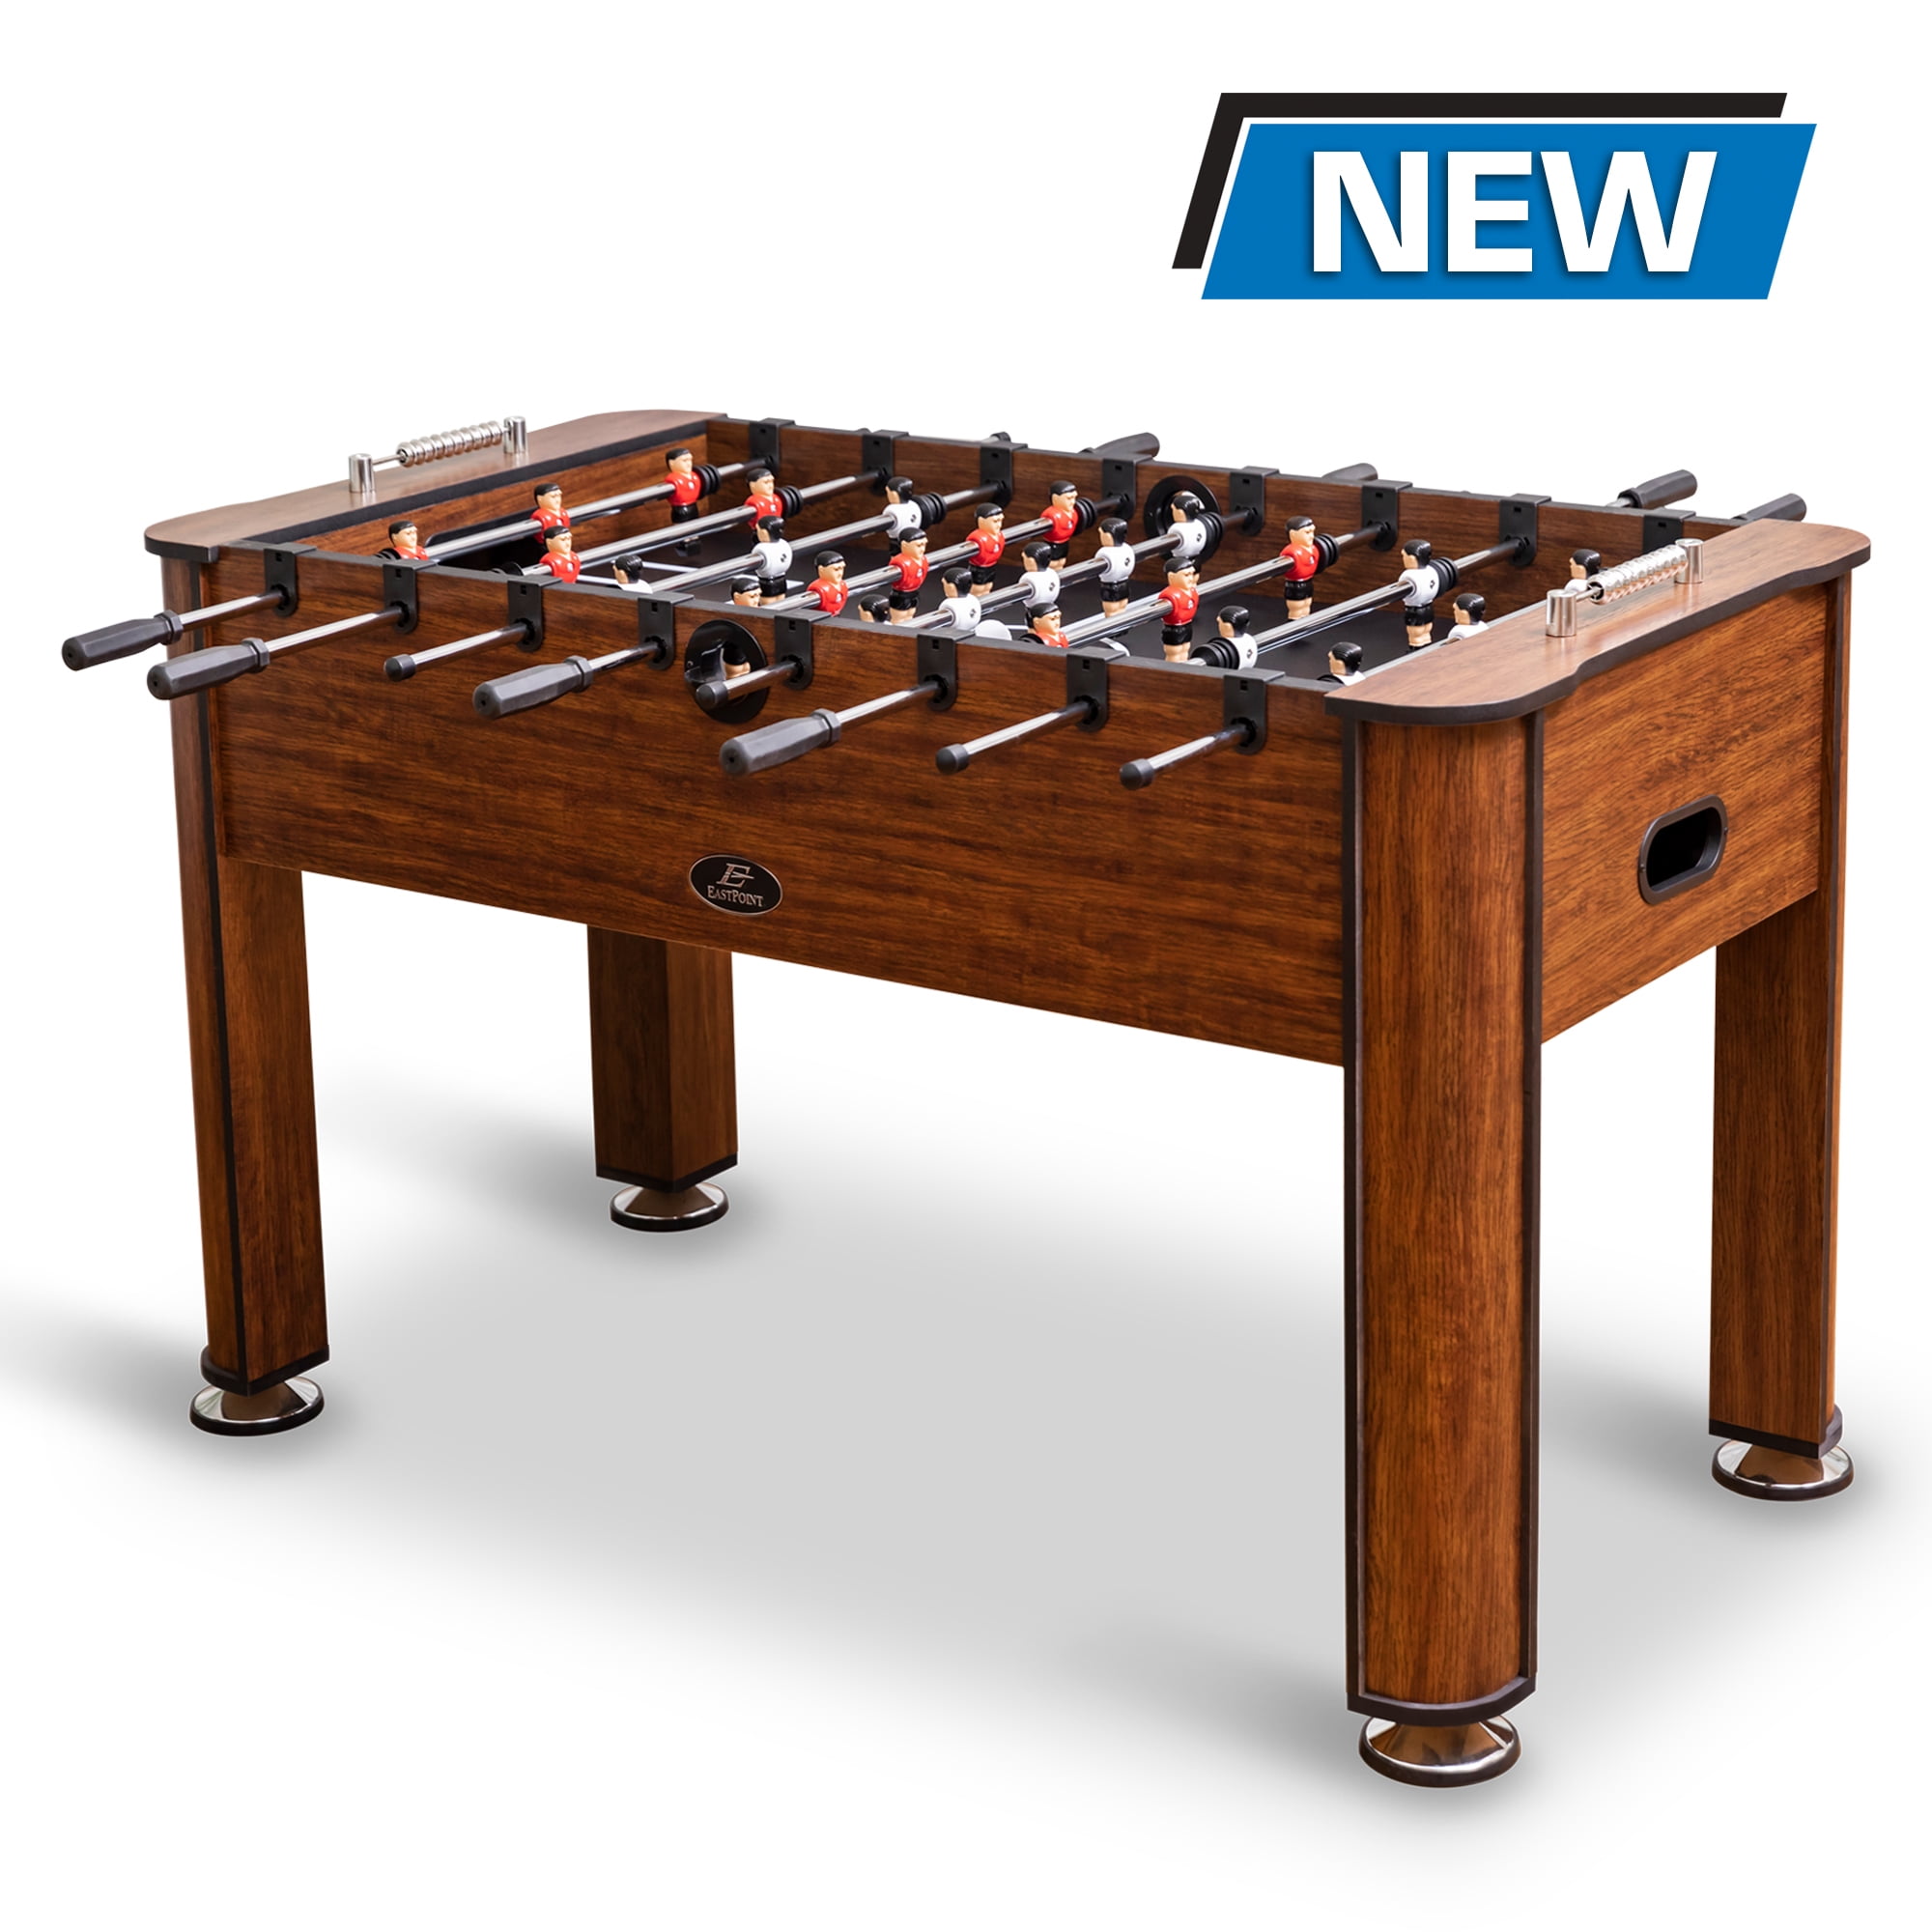 27” CLASSIC TABLE FOOTBALL DELUXE FREE STANDING FAMILY SOCCER GAME WOODEN LEGS 